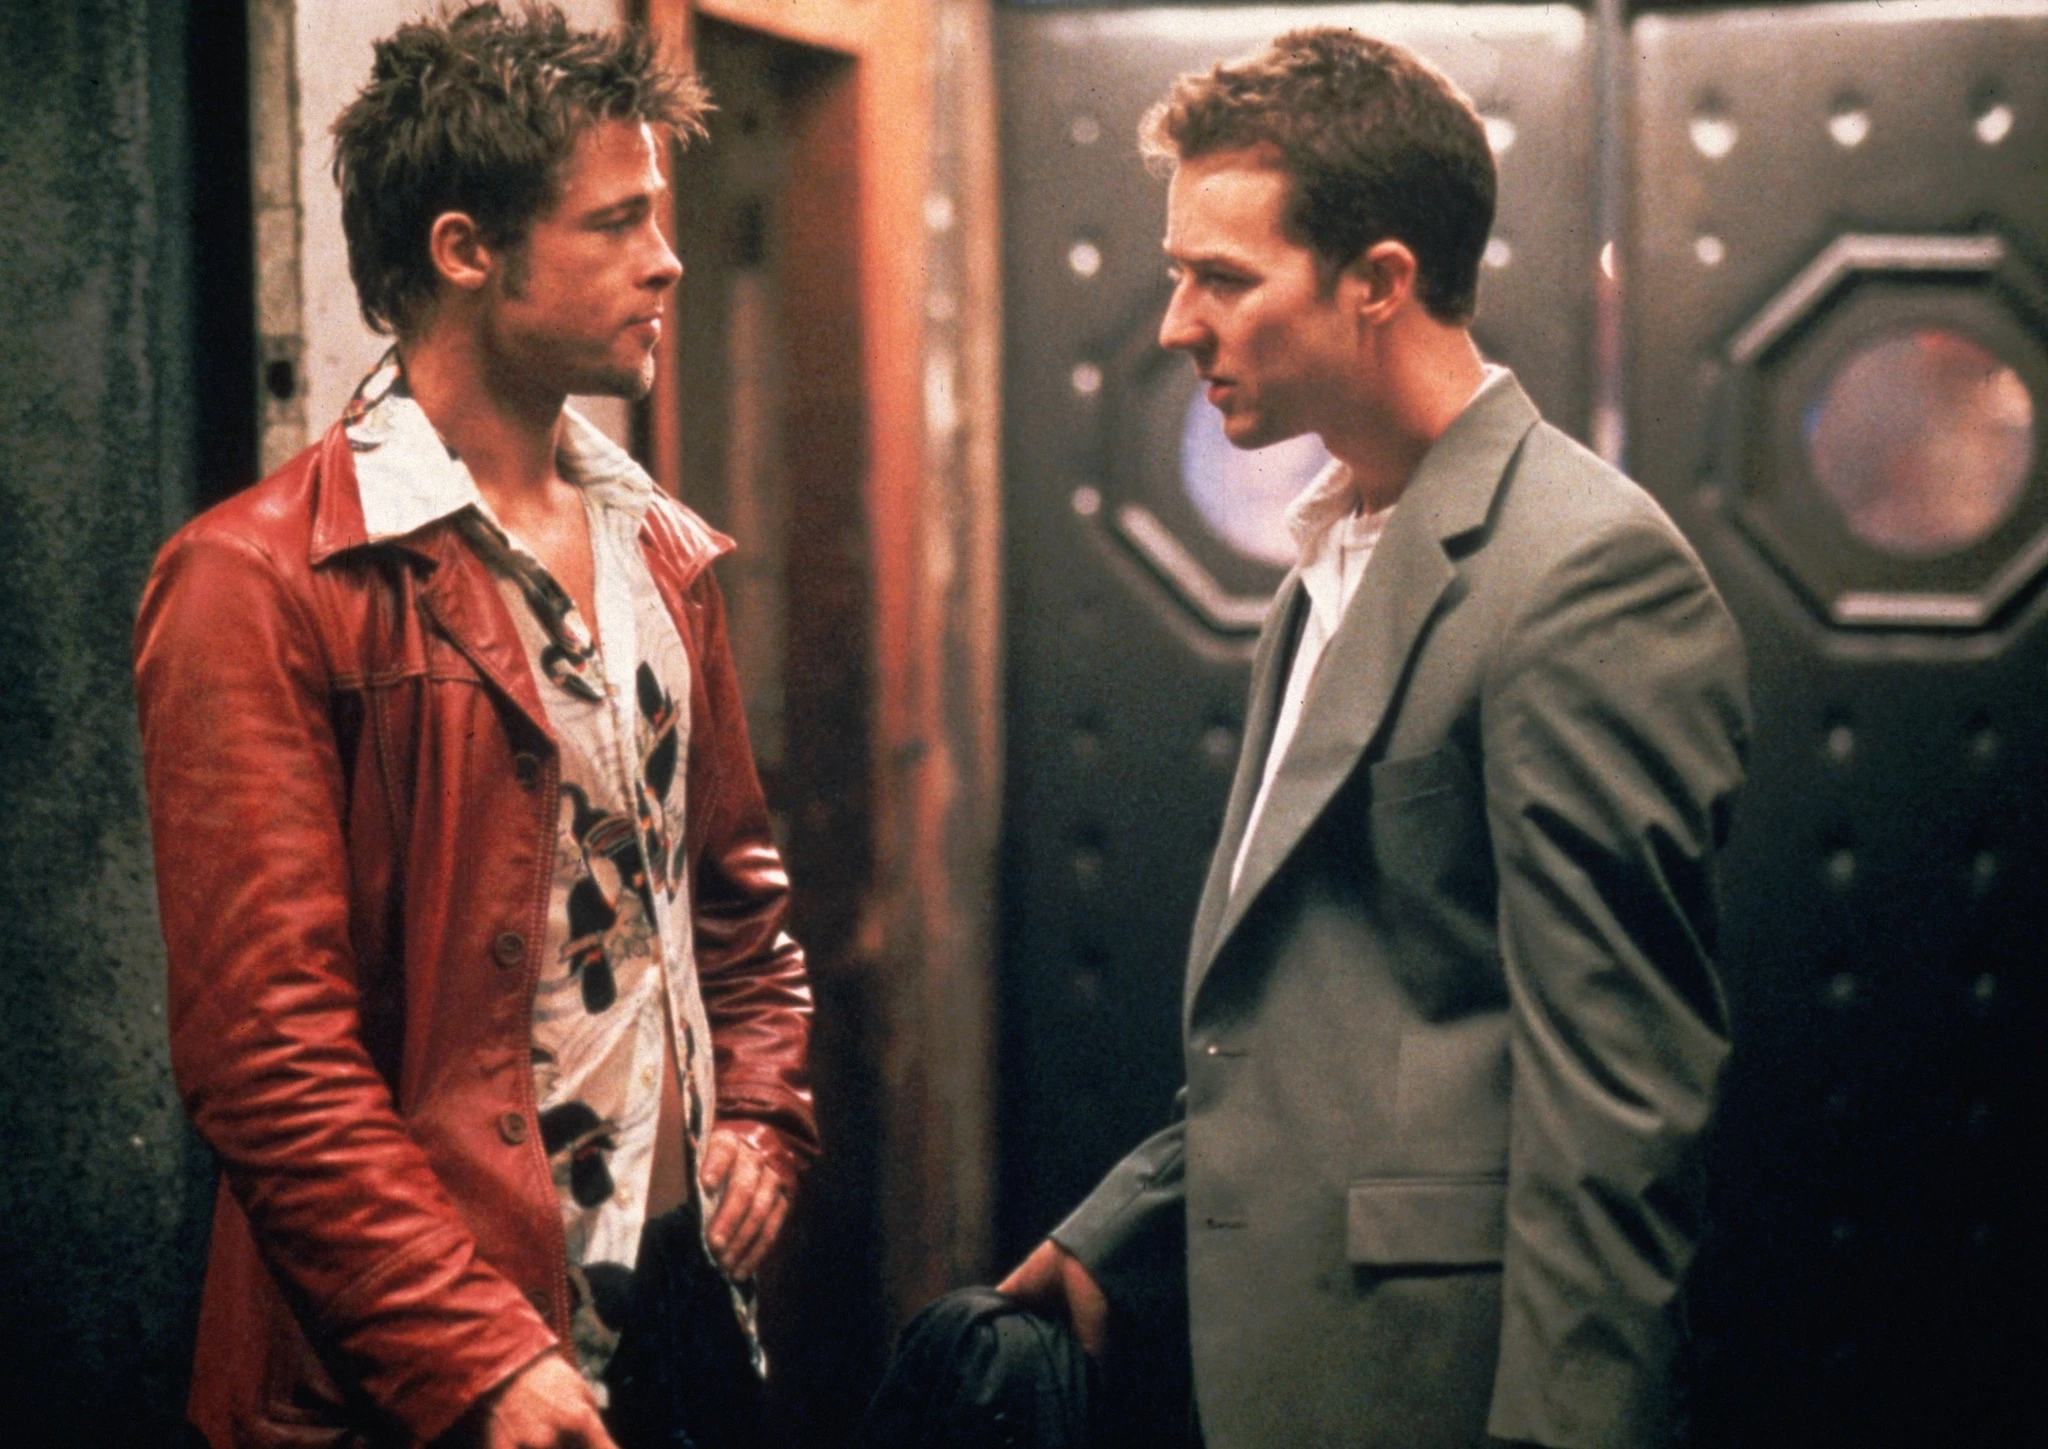 The Fight Club (1999) movies cast - movies like american psycho